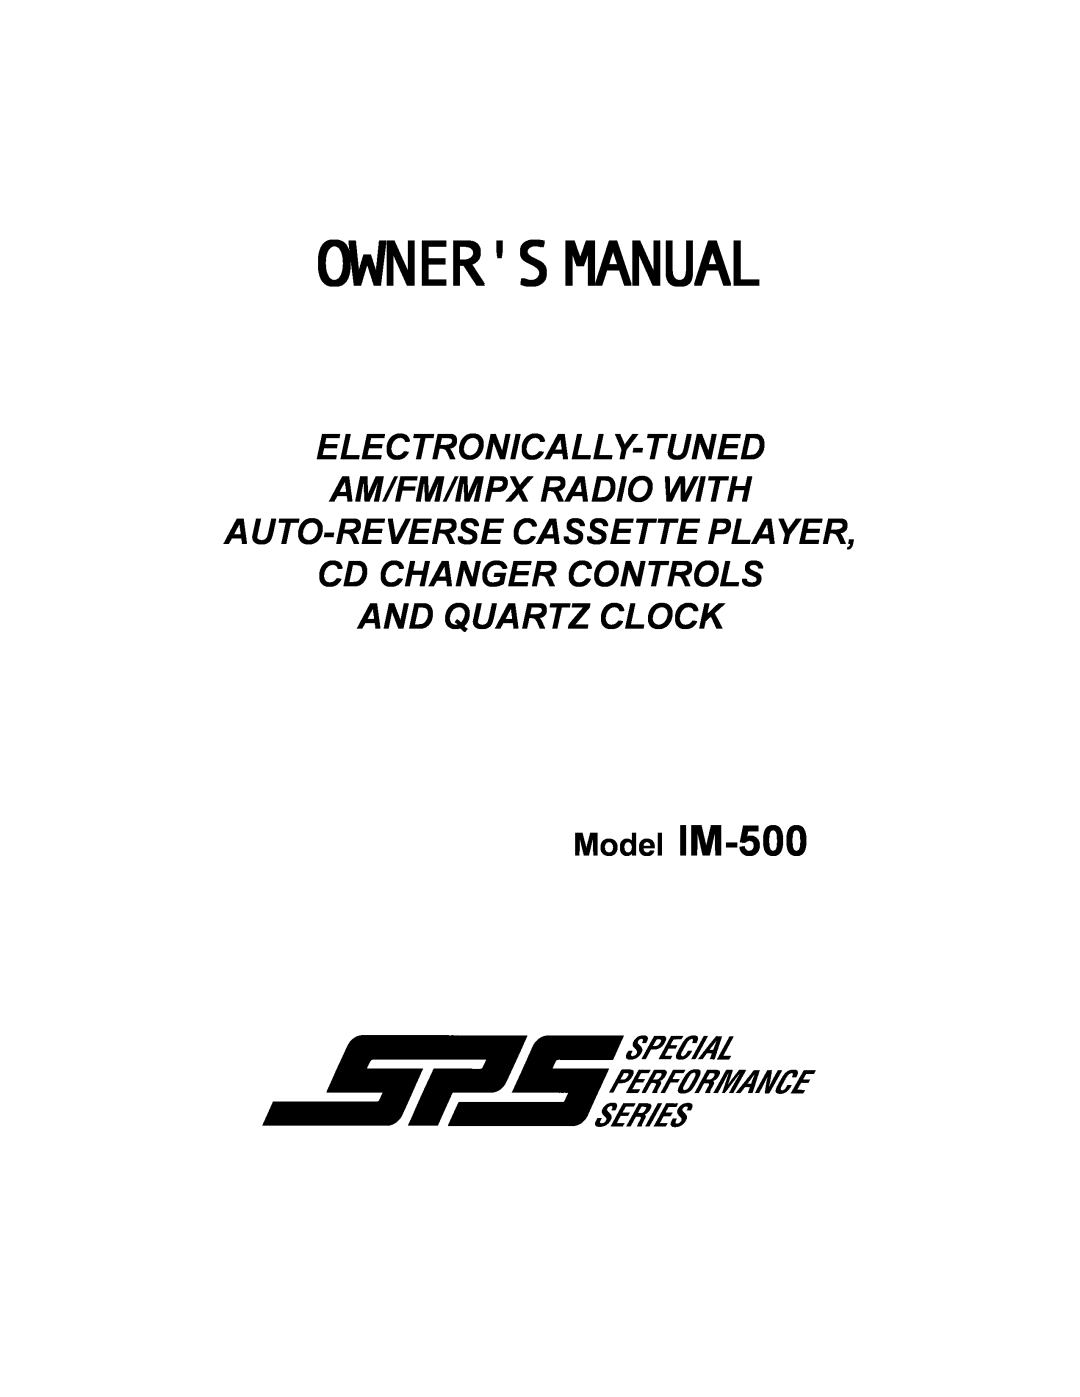 Audiovox owner manual Ownersmanual, Electronically-Tuned Am/Fm/Mpx Radio With, And Quartz Clock, Model IM-500 